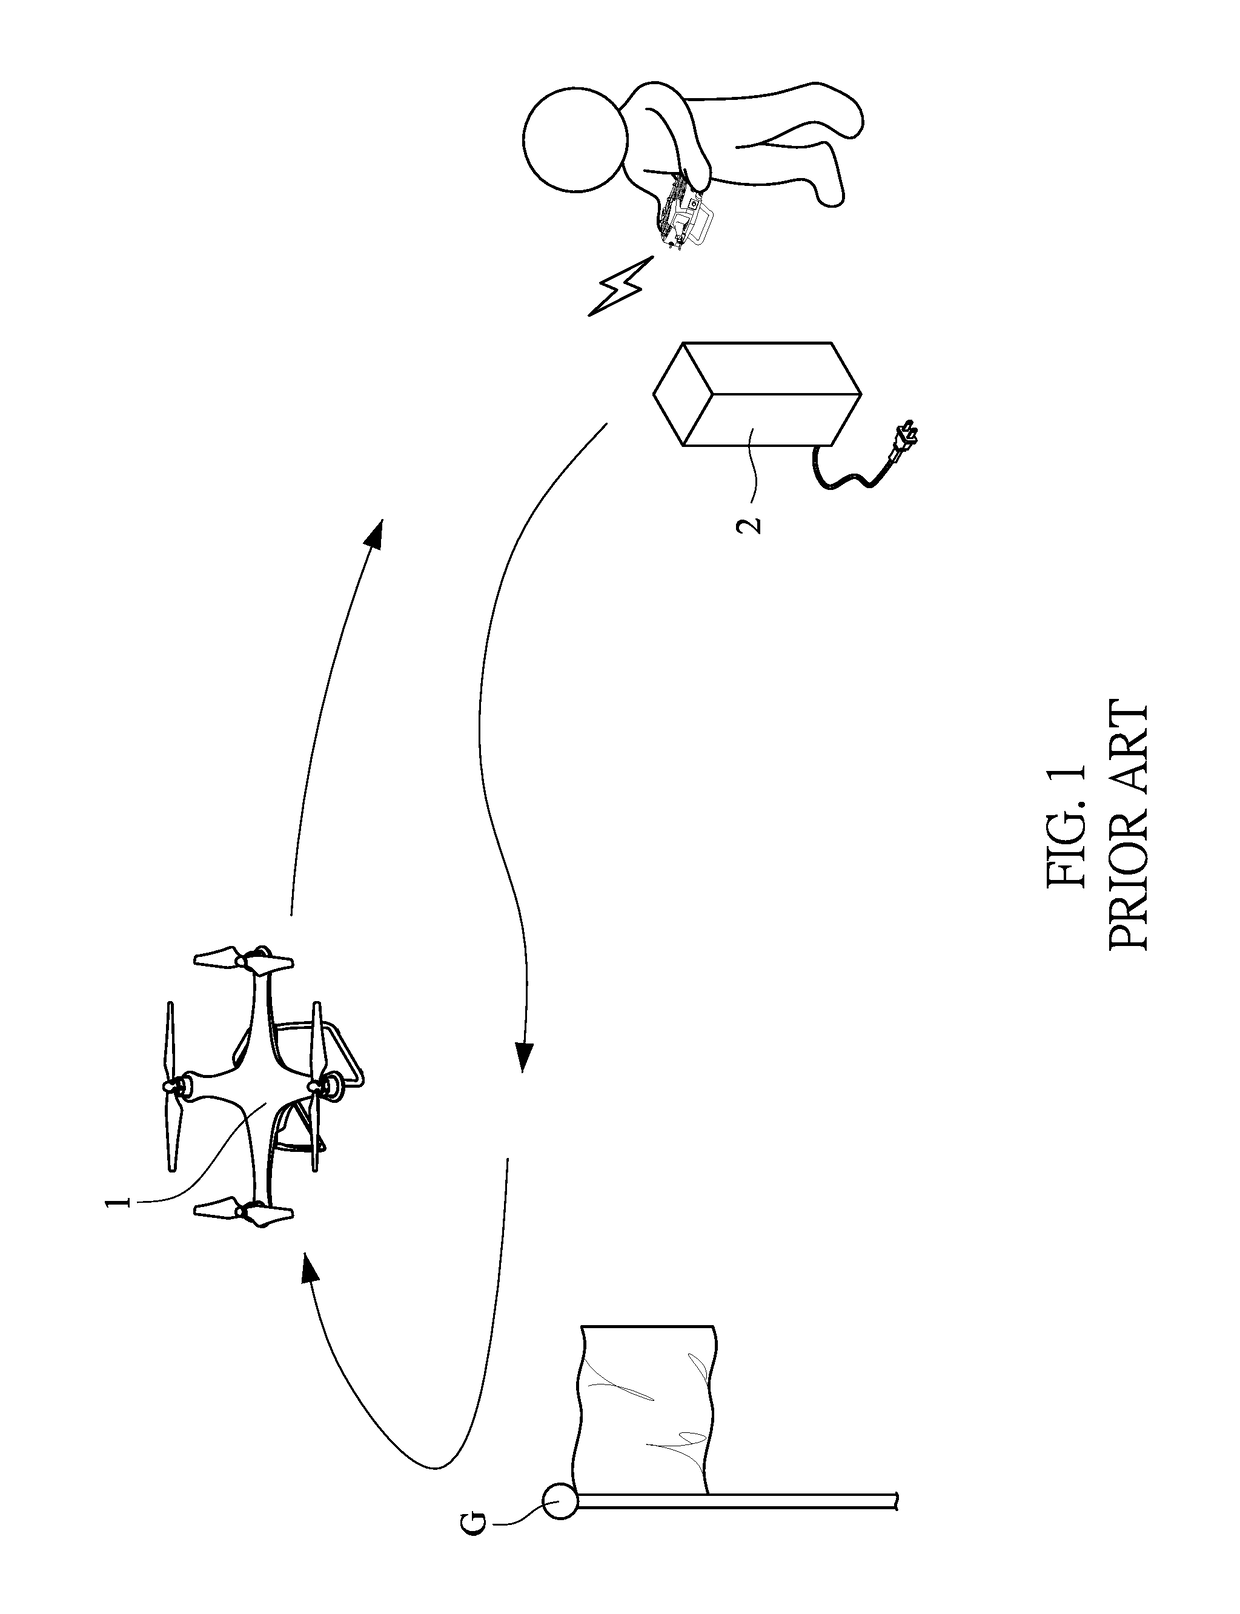 Mobile vehicle charging system